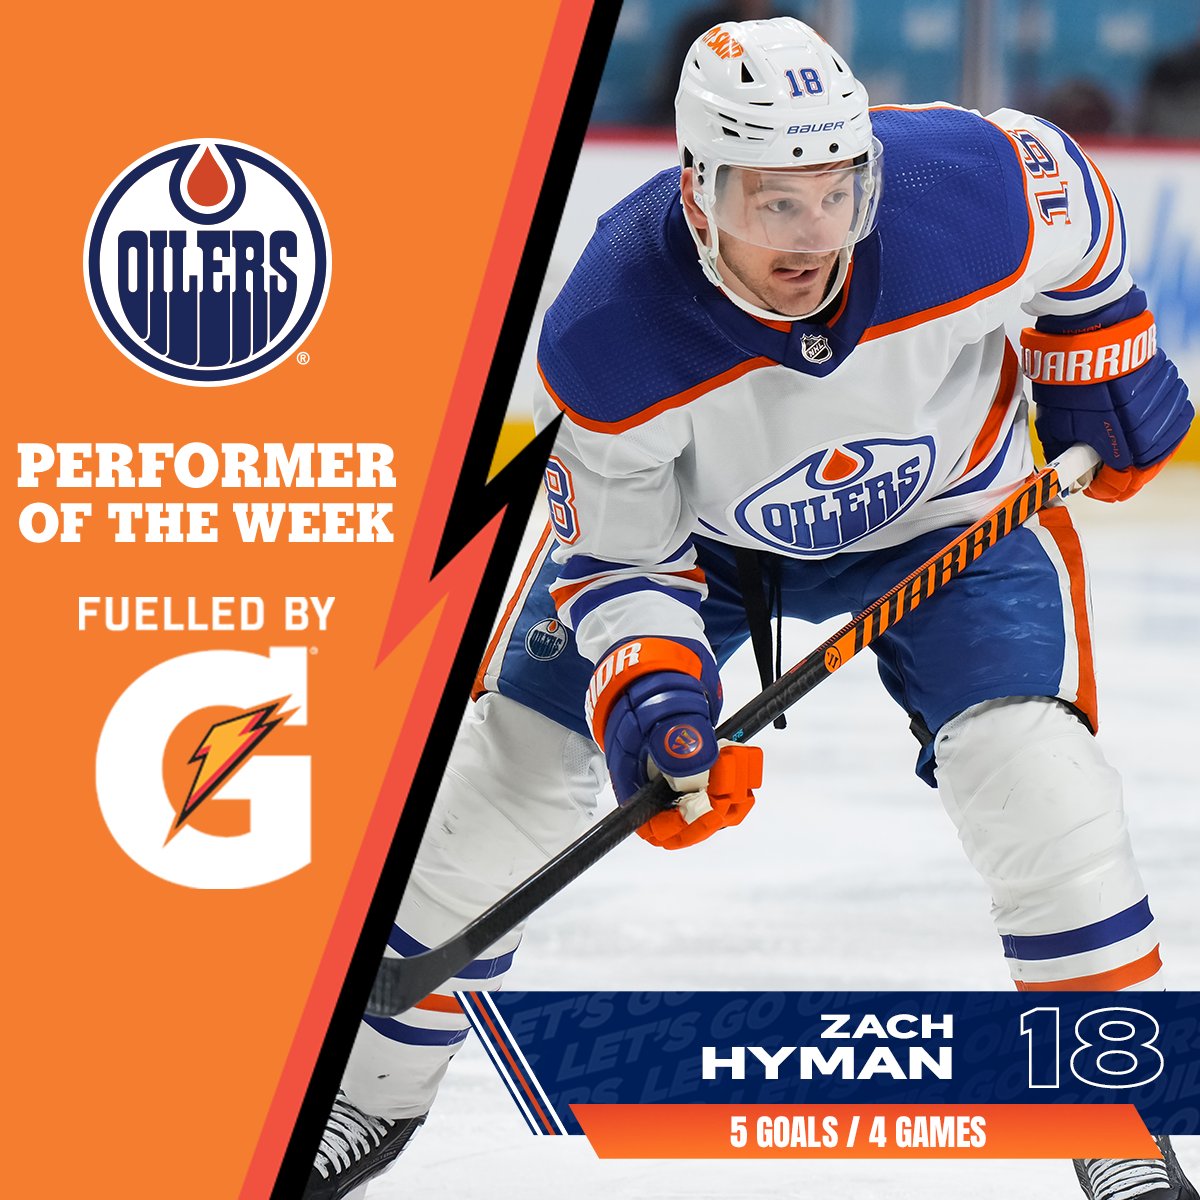 🚨 ZMH 🚨

With five goals in four games, surpassing 50 goals on the season & 200 in his career, Zach is our @Gatorade Performer of the Week for the second consecutive week!

#FuelledByG | #LetsGoOilers